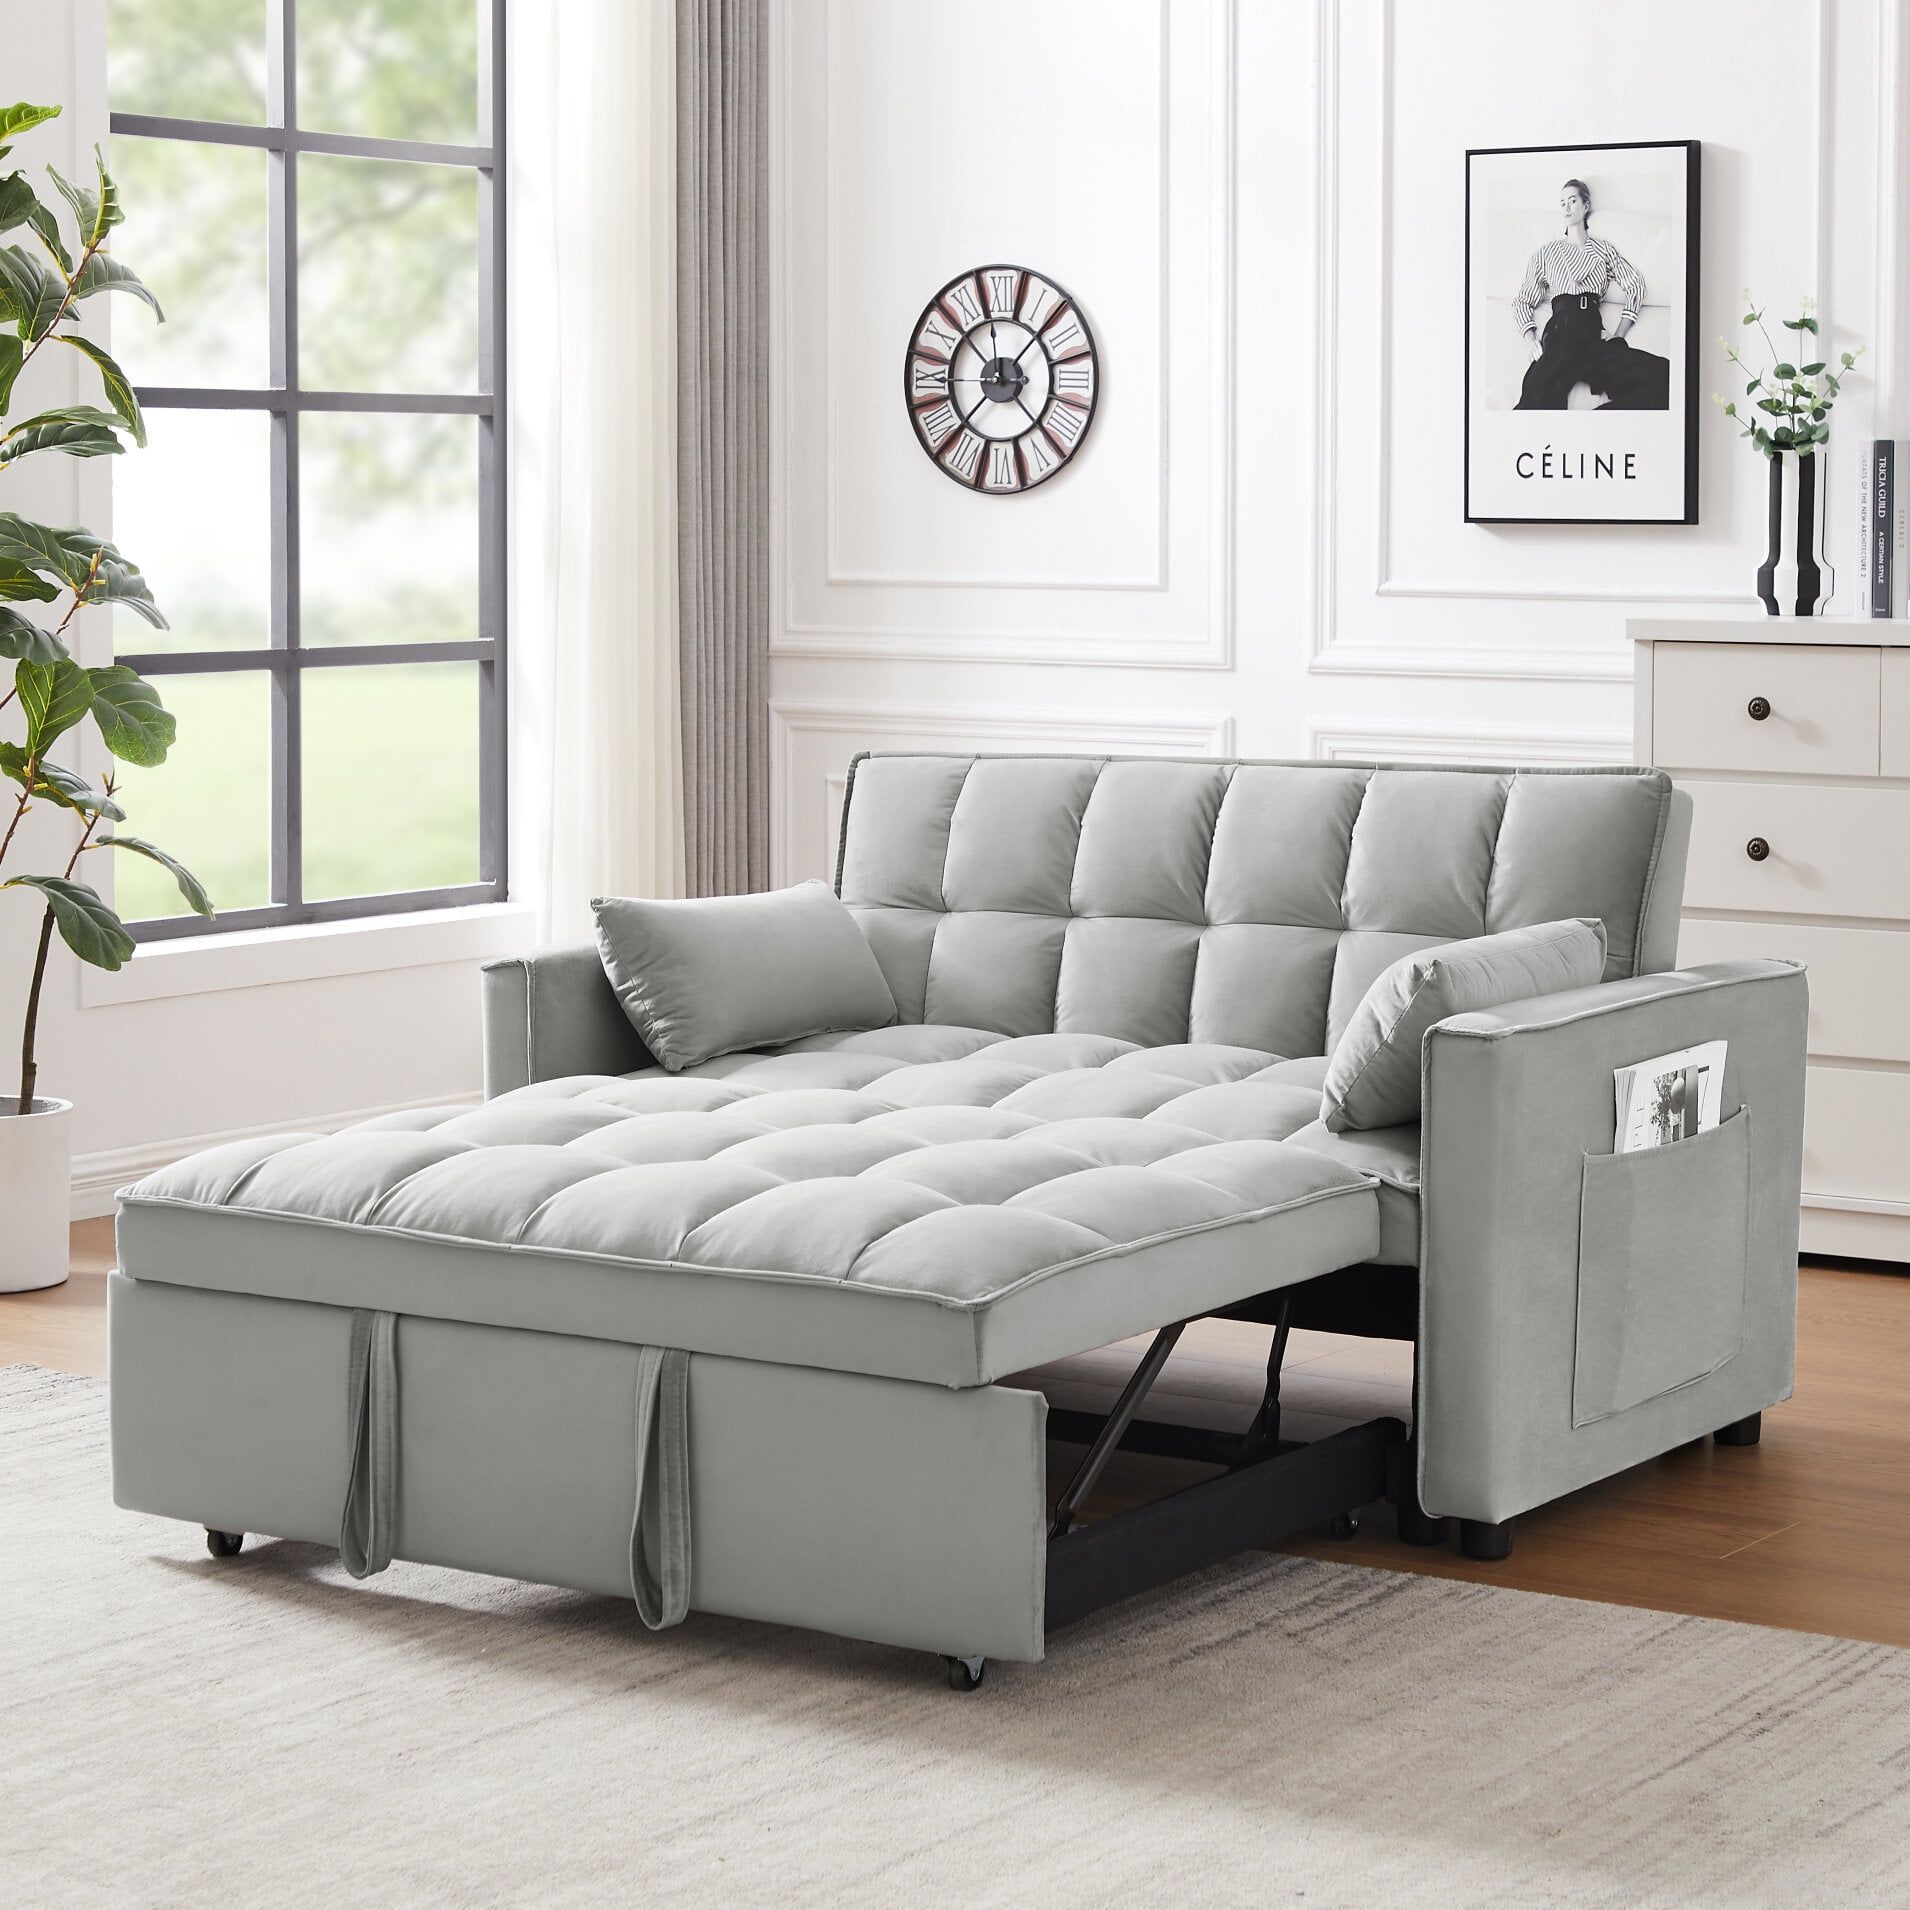 3 In 1 Pull Out Sleeper Sofa Bed,tufted Velvet Convertible Loveseat Futon  Sofa With Adjustable Backrest, Lounge Armchair Sofa With Lumbar Pillows And  Side Pockets For Living Room,gray – Walmart For 3 In 1 Gray Pull Out Sleeper Sofas (Photo 1 of 15)